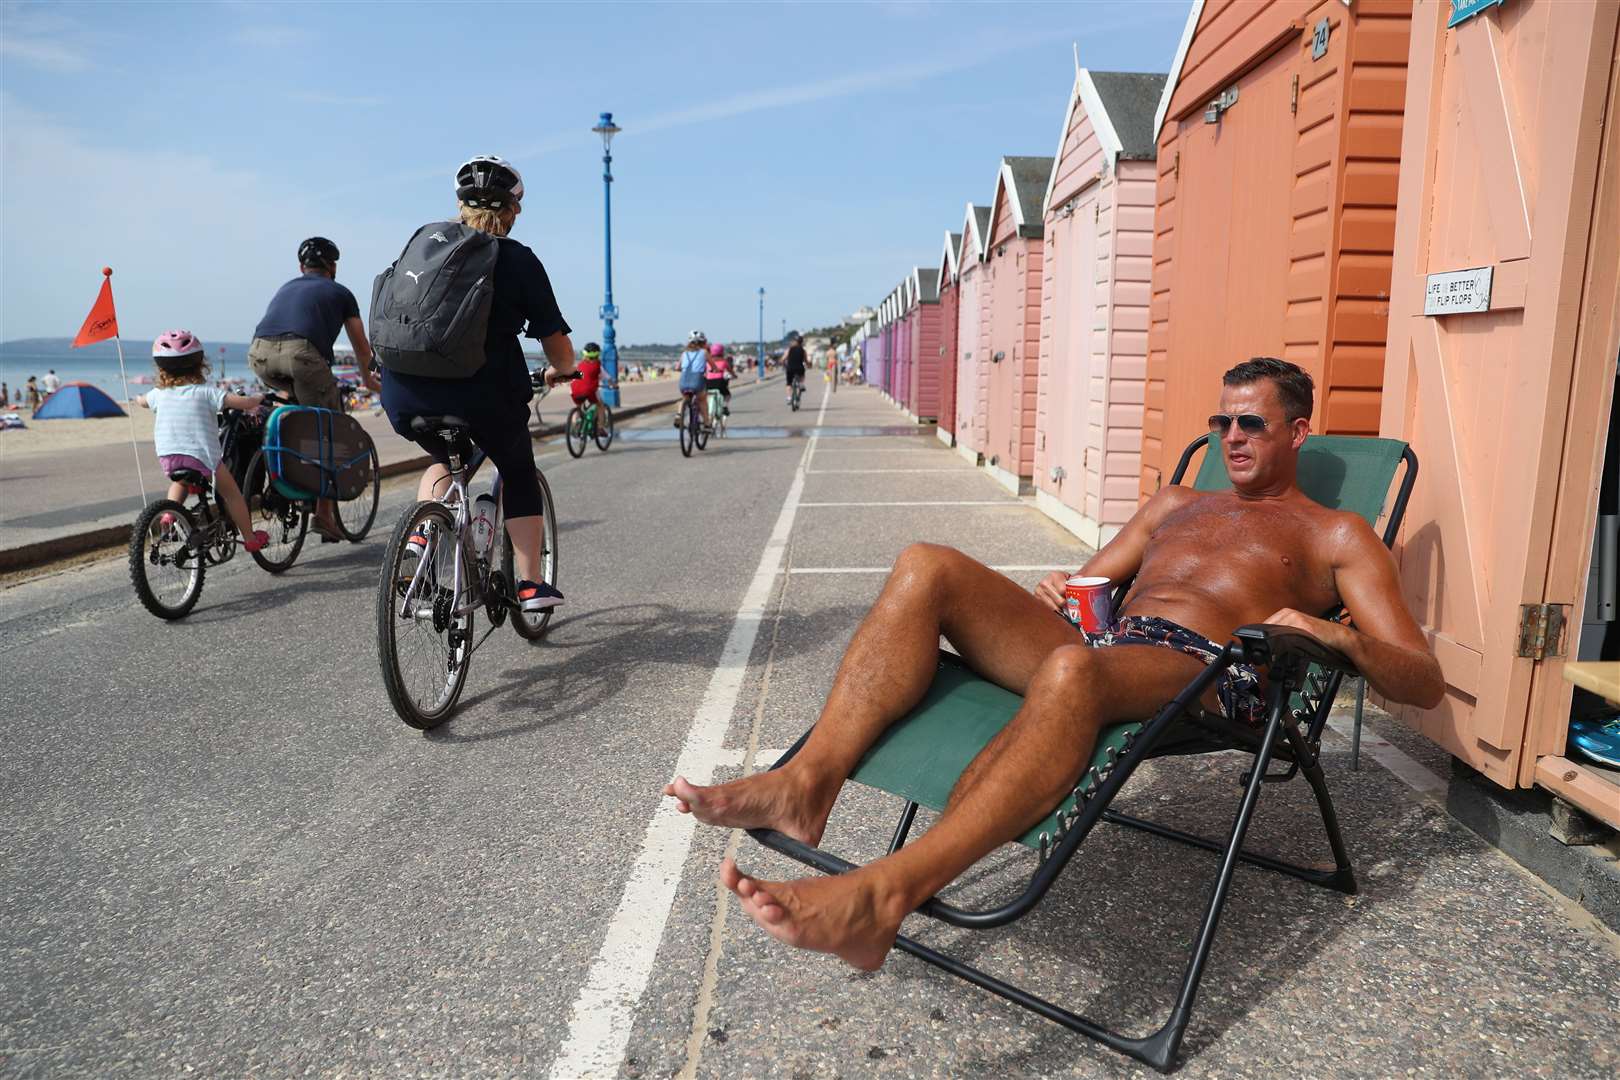 Soaking up rays outside a beach hut at Bournemouth on August 8 (Andrew Matthews/PA)